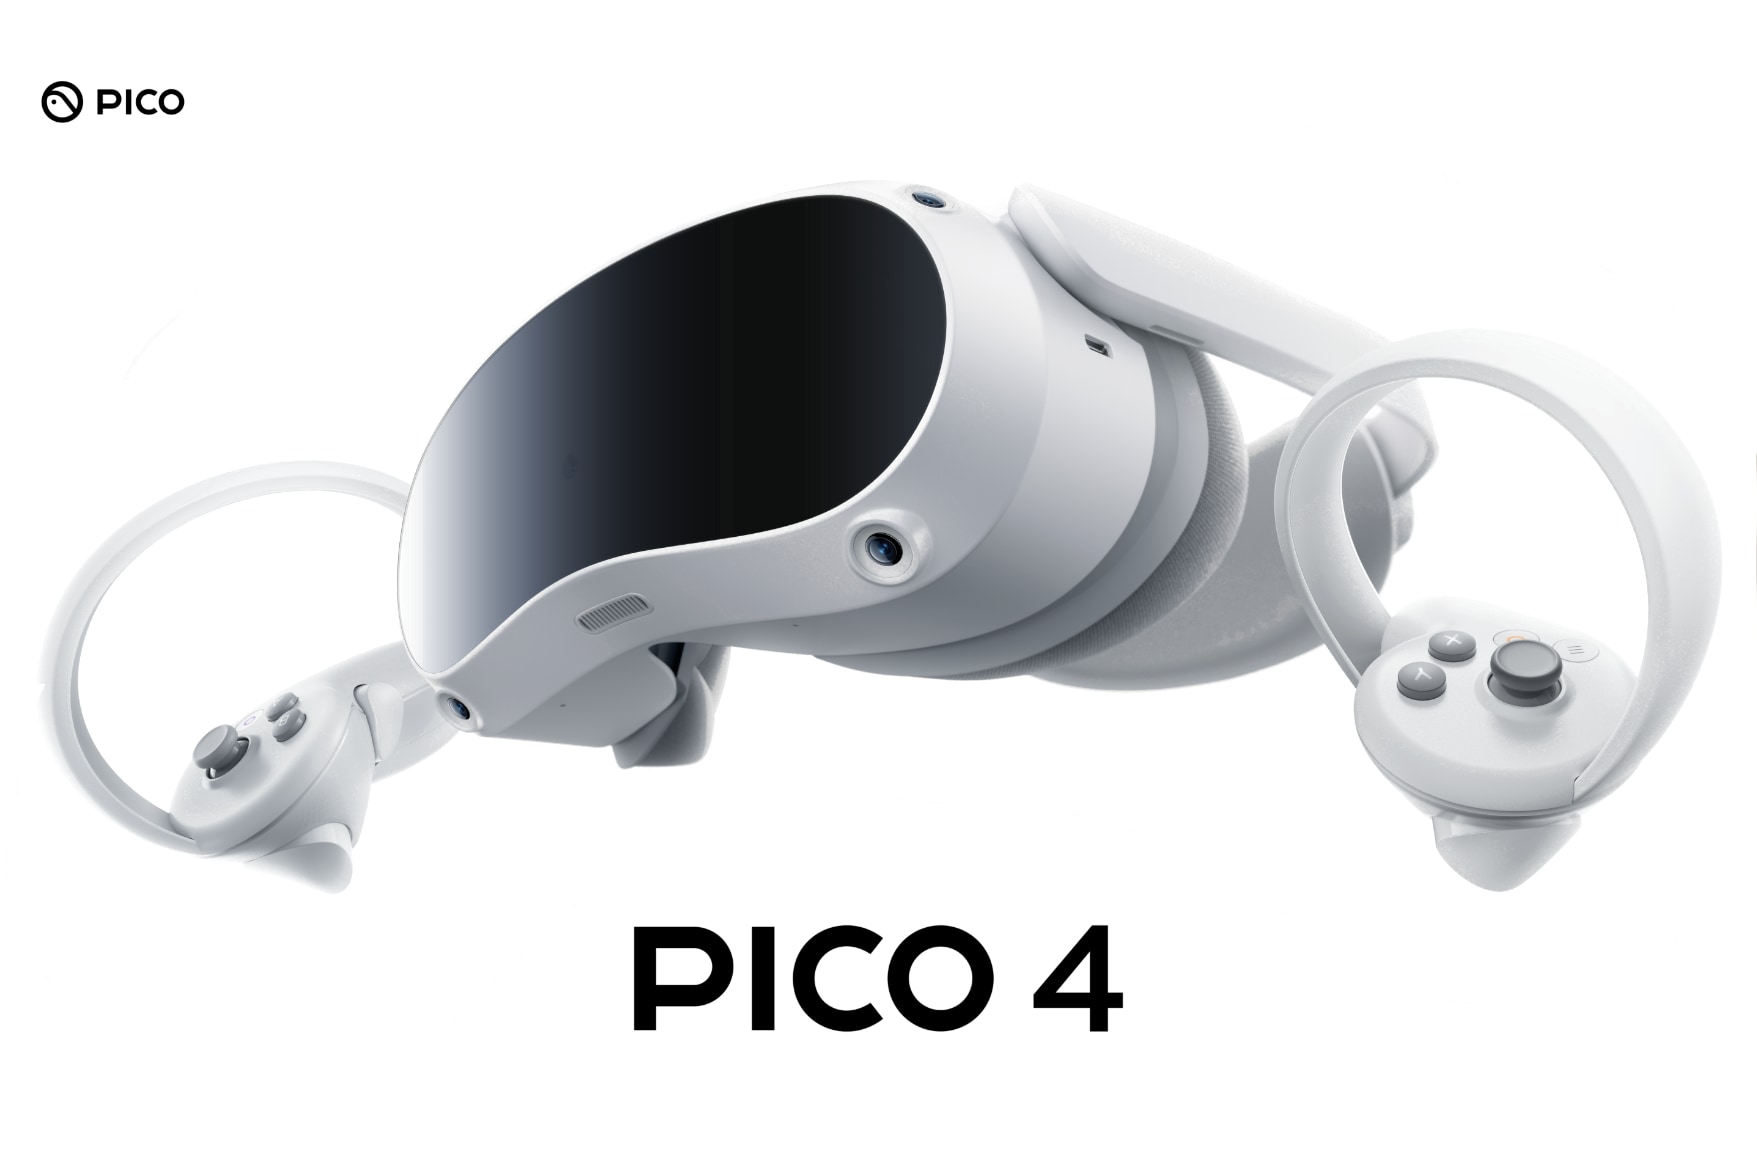 Pico 4 VR headset is here to take on the Meta Quest 2 | Digital Trends